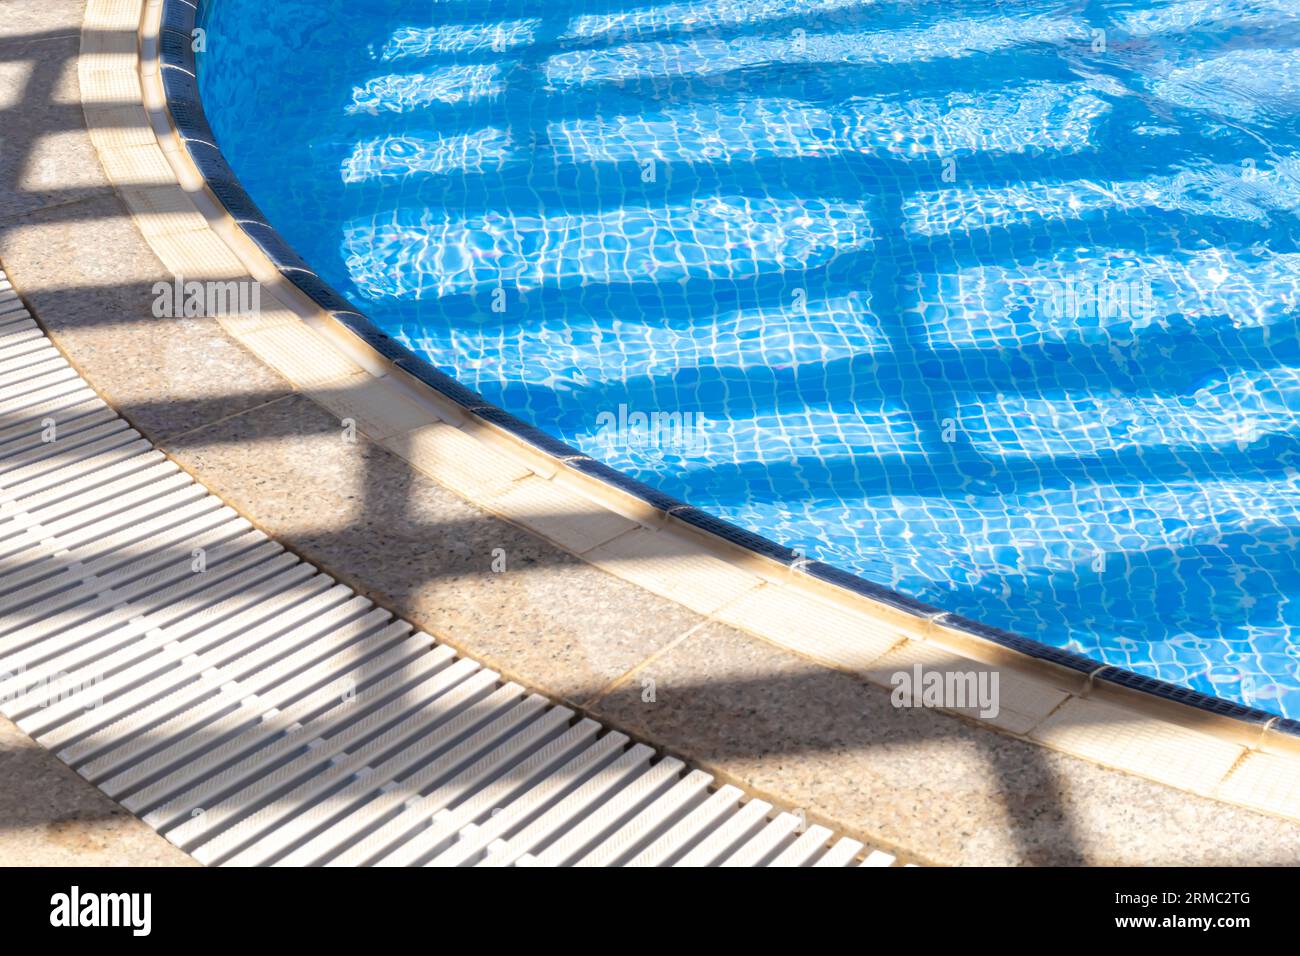 Light and shadows grid on water in outdoor pool Stock Photo